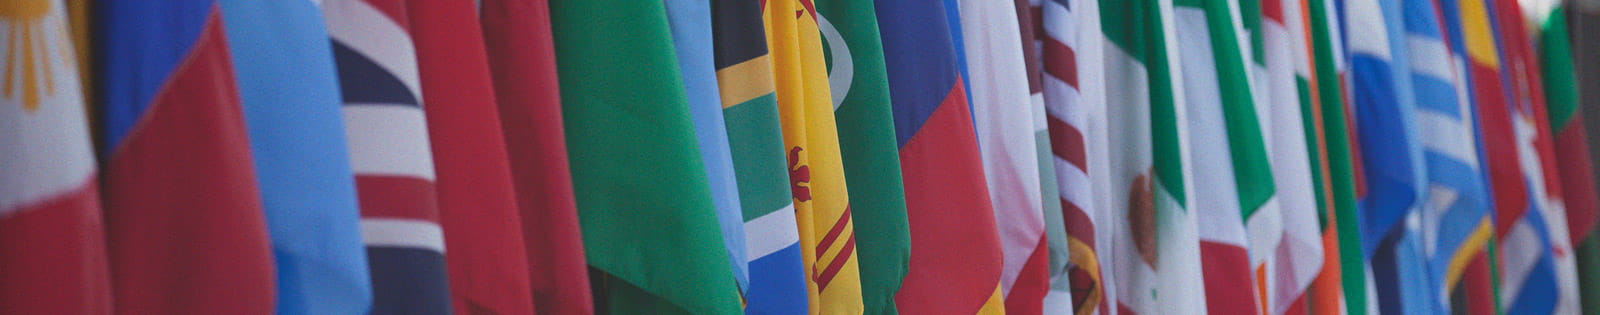 International_Flags_at_Commencement